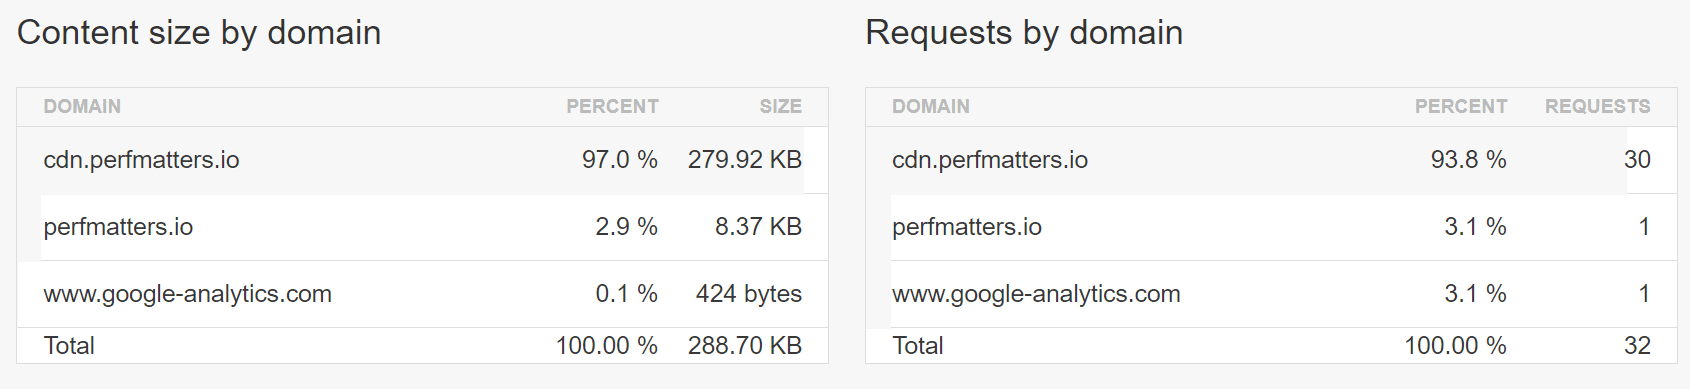 Requests by domain